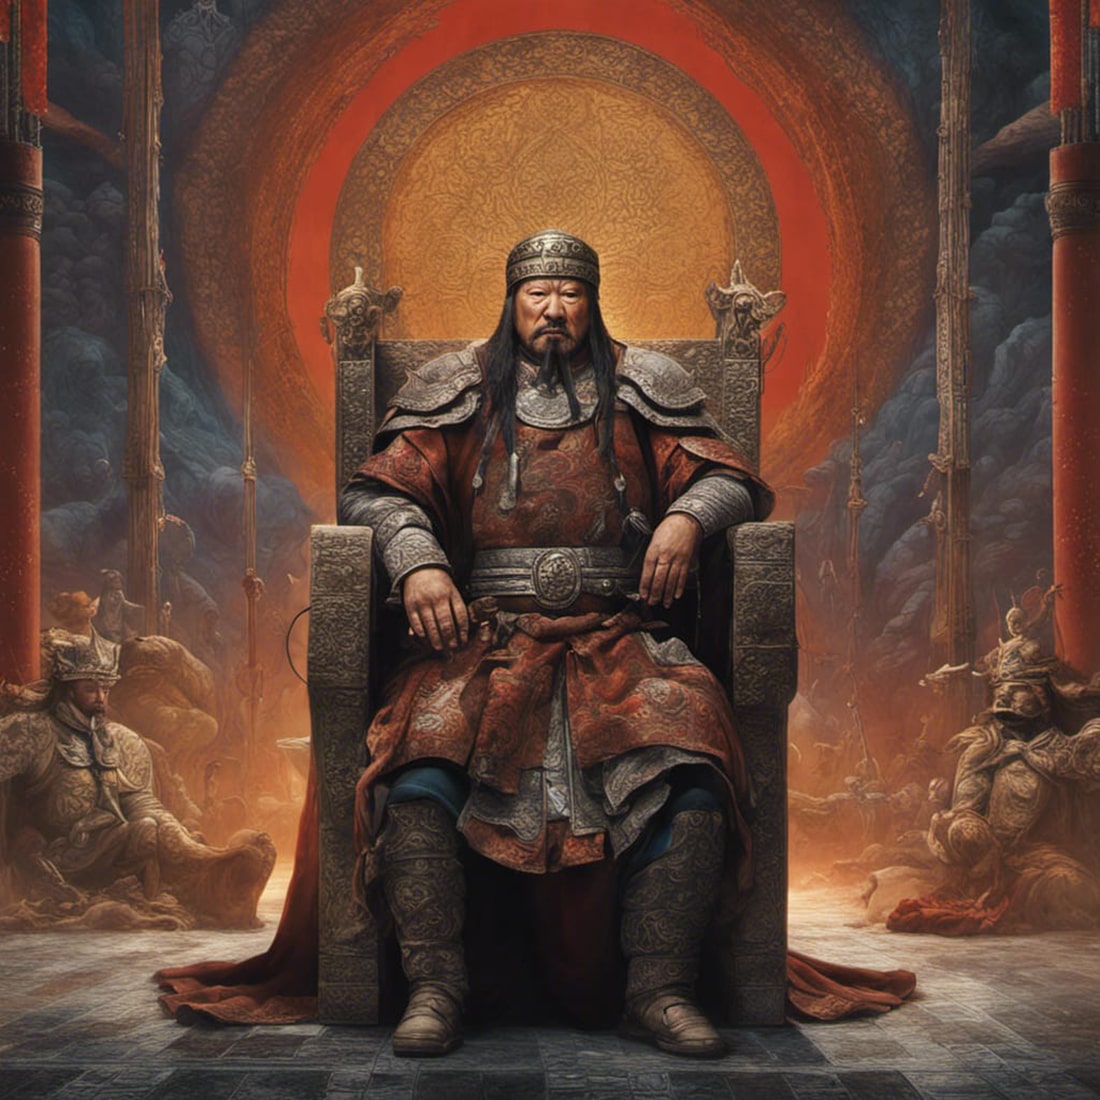 Historical 9 pictures of genghis khan preview image.